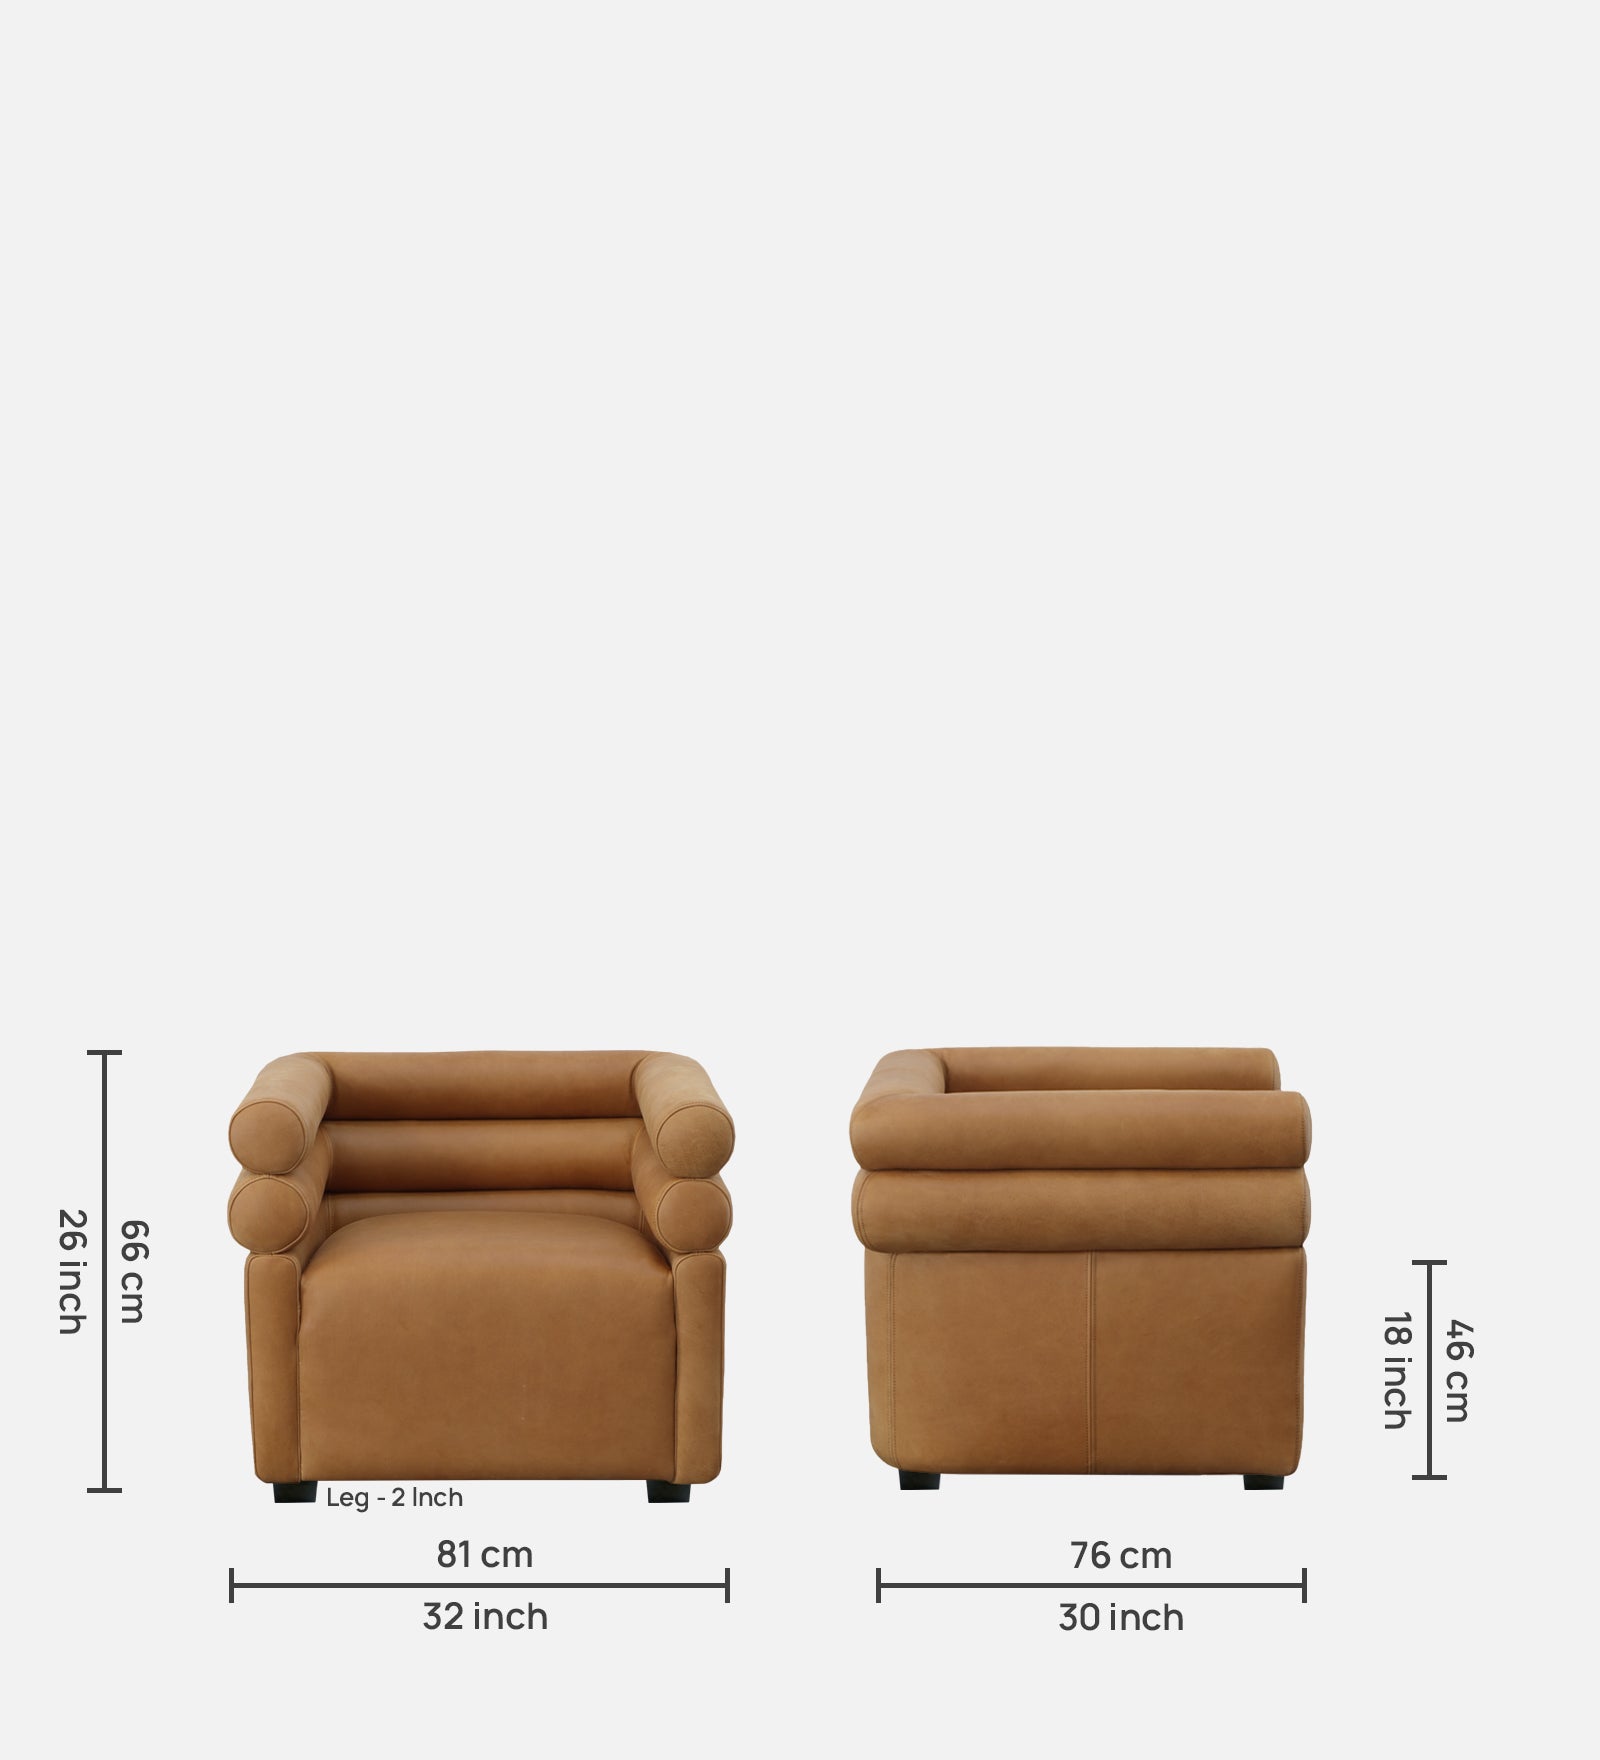 Arve Leather Arm Chair in Matte Brown Colour